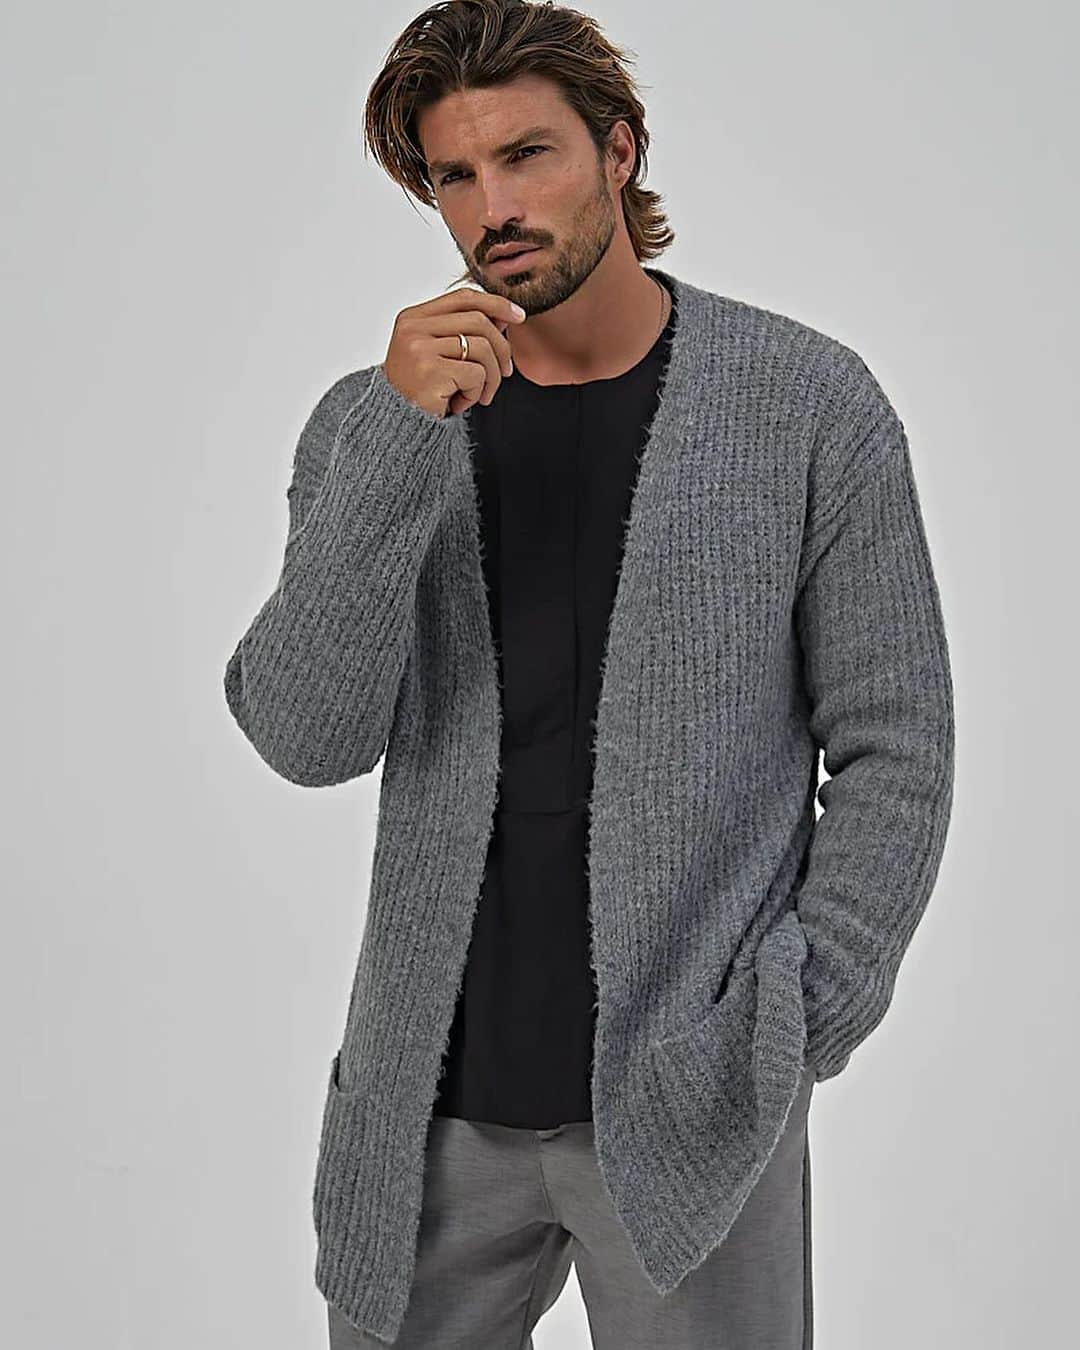 Mariano Di Vaioのインスタグラム：「Wrap yourself in cozy perfection with our latest sweater collection. From timeless classics to trendy must-haves, these sweaters are here to keep you stylish and warm. Which one will be your favorite? Swipe through and discover your new winter wardrobe. Don't miss out, shop now! ❄️🧥 #SweaterWeather #FashionFaves #nohowstyle」